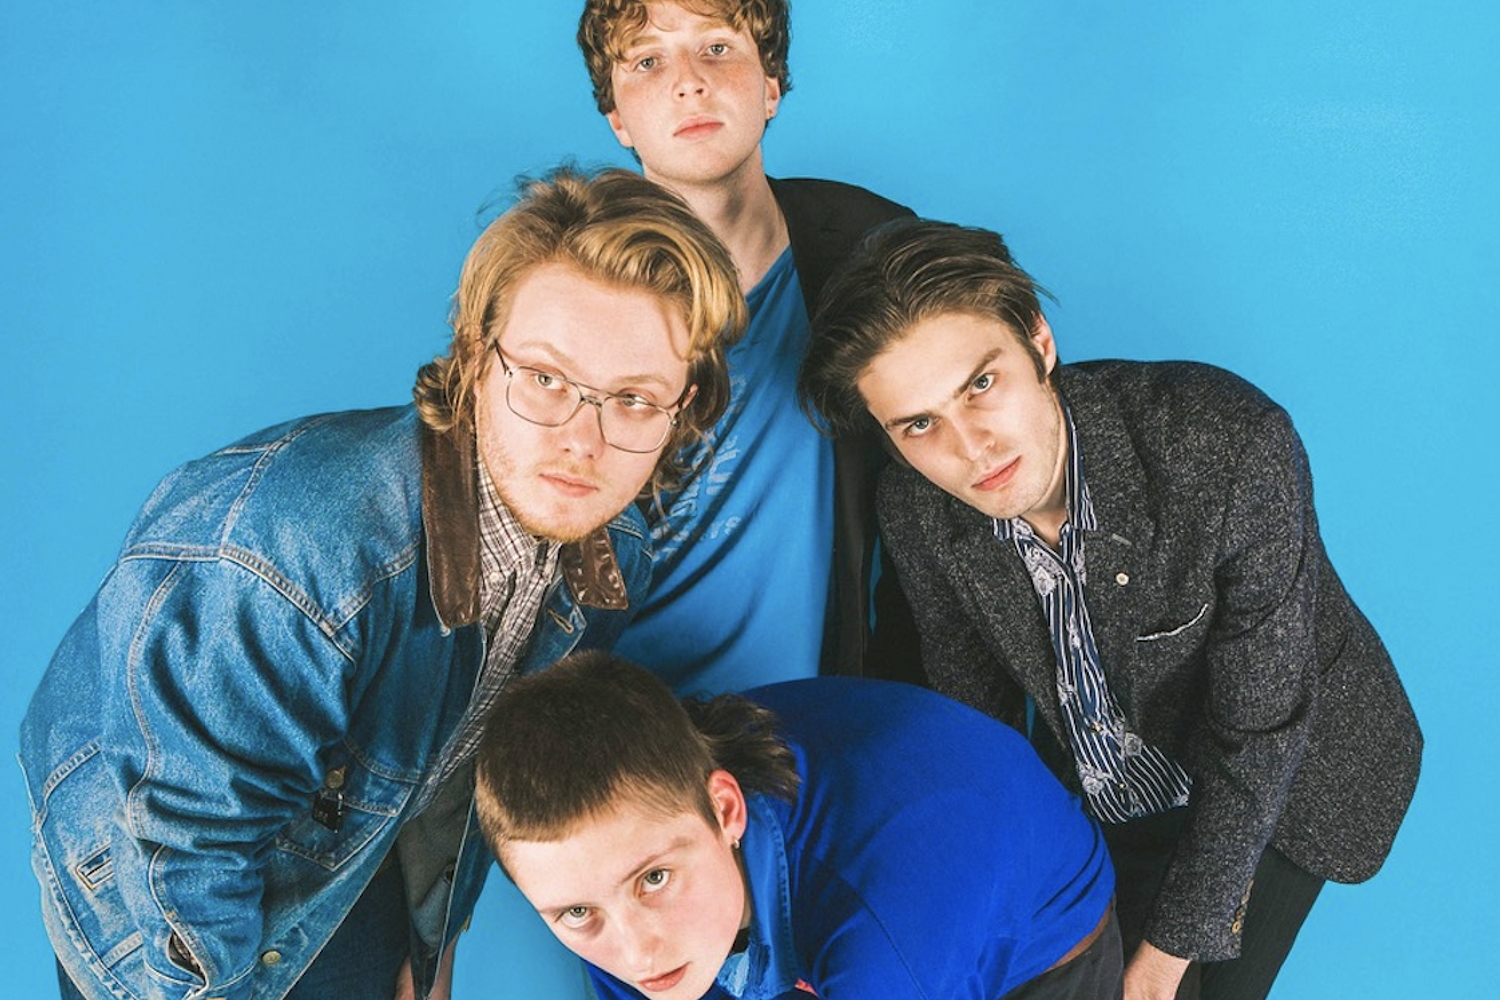 The Wha release new single ‘Young Skins’